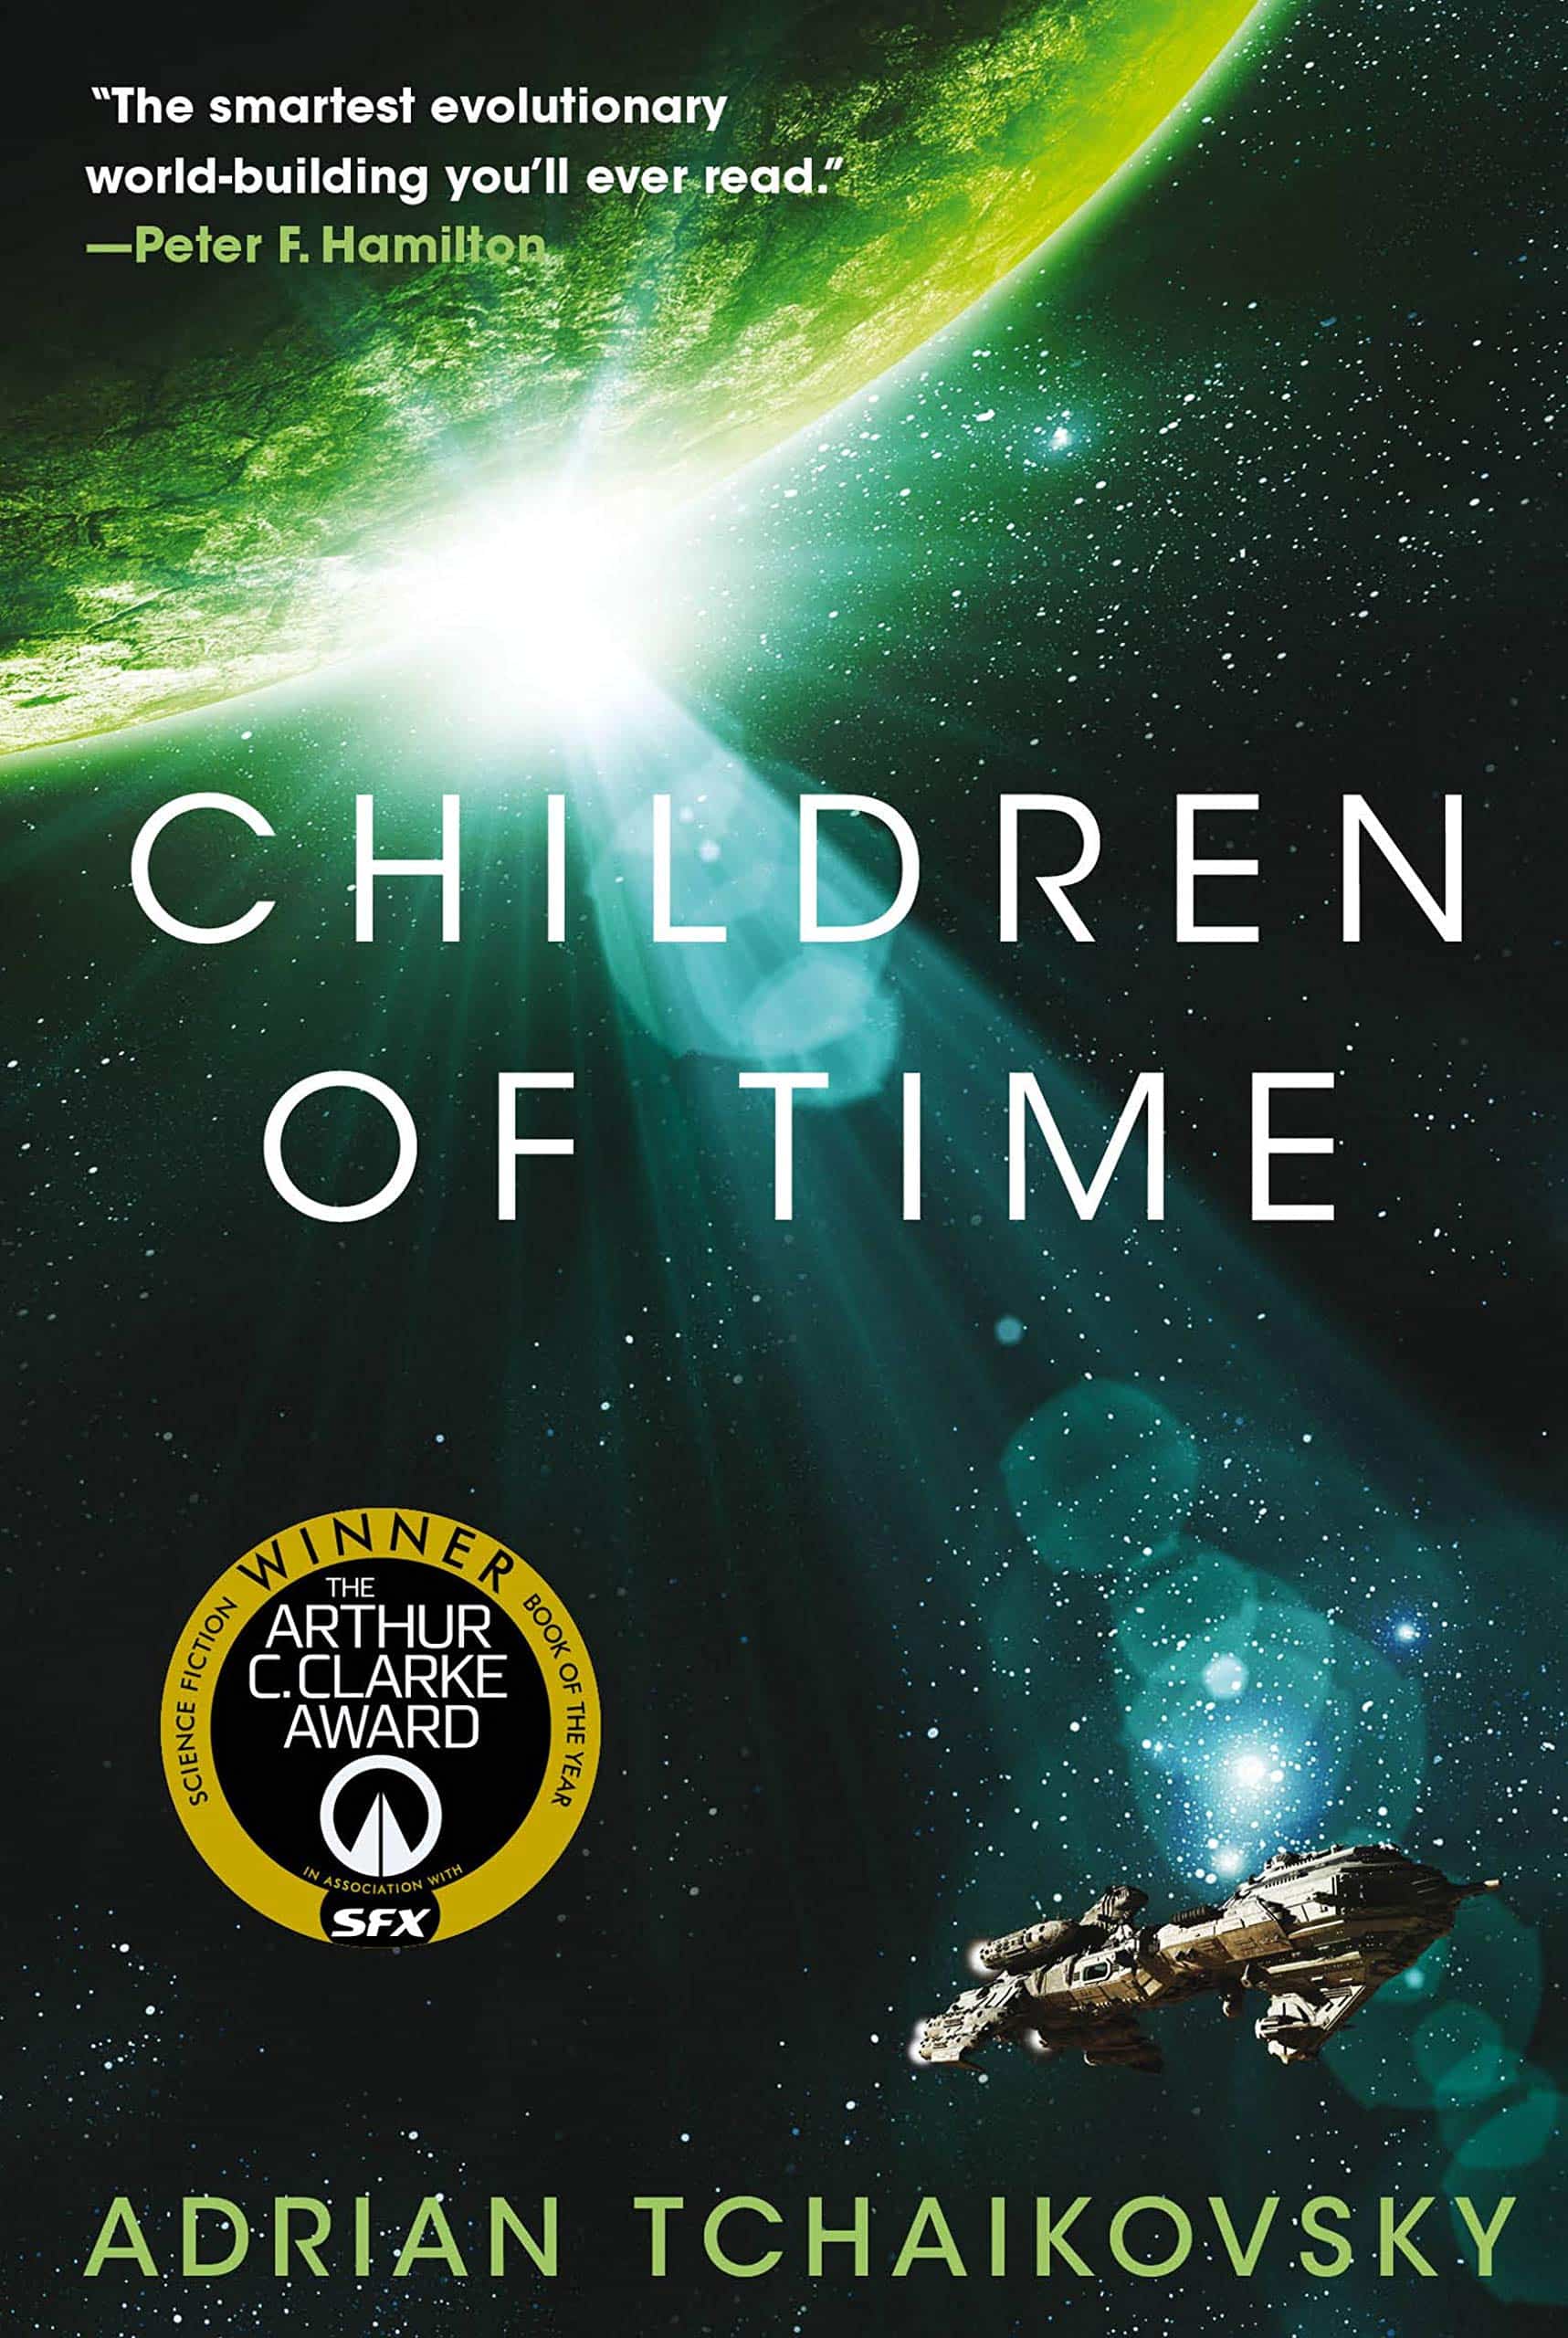 The cover of Children of Time